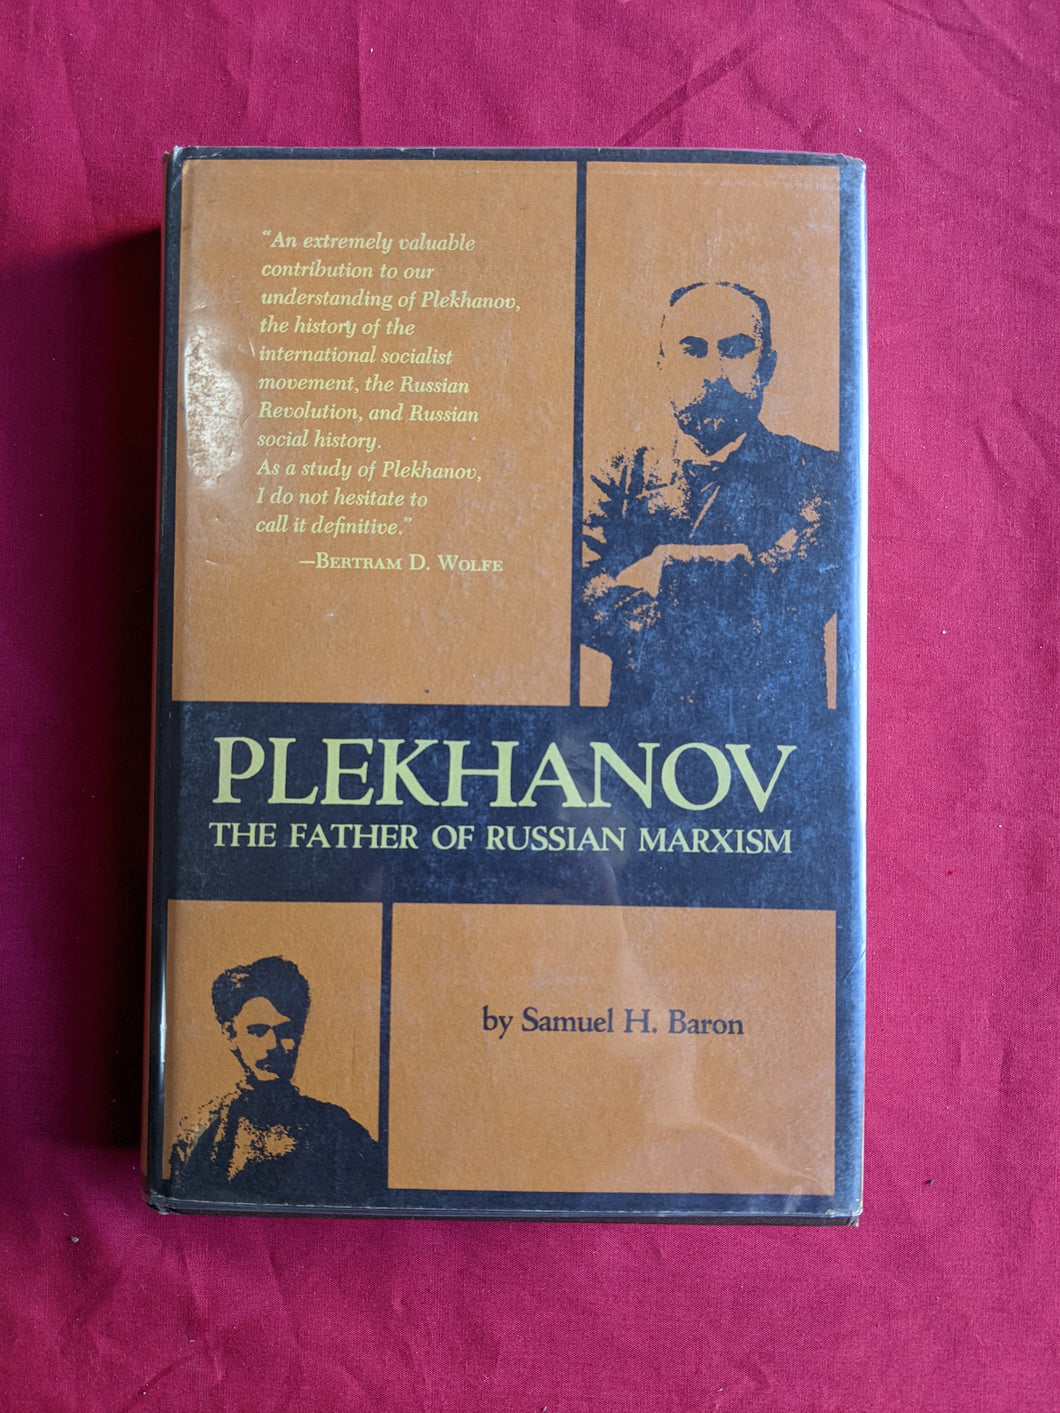 Plekhanov: The Father of Russian Marxism